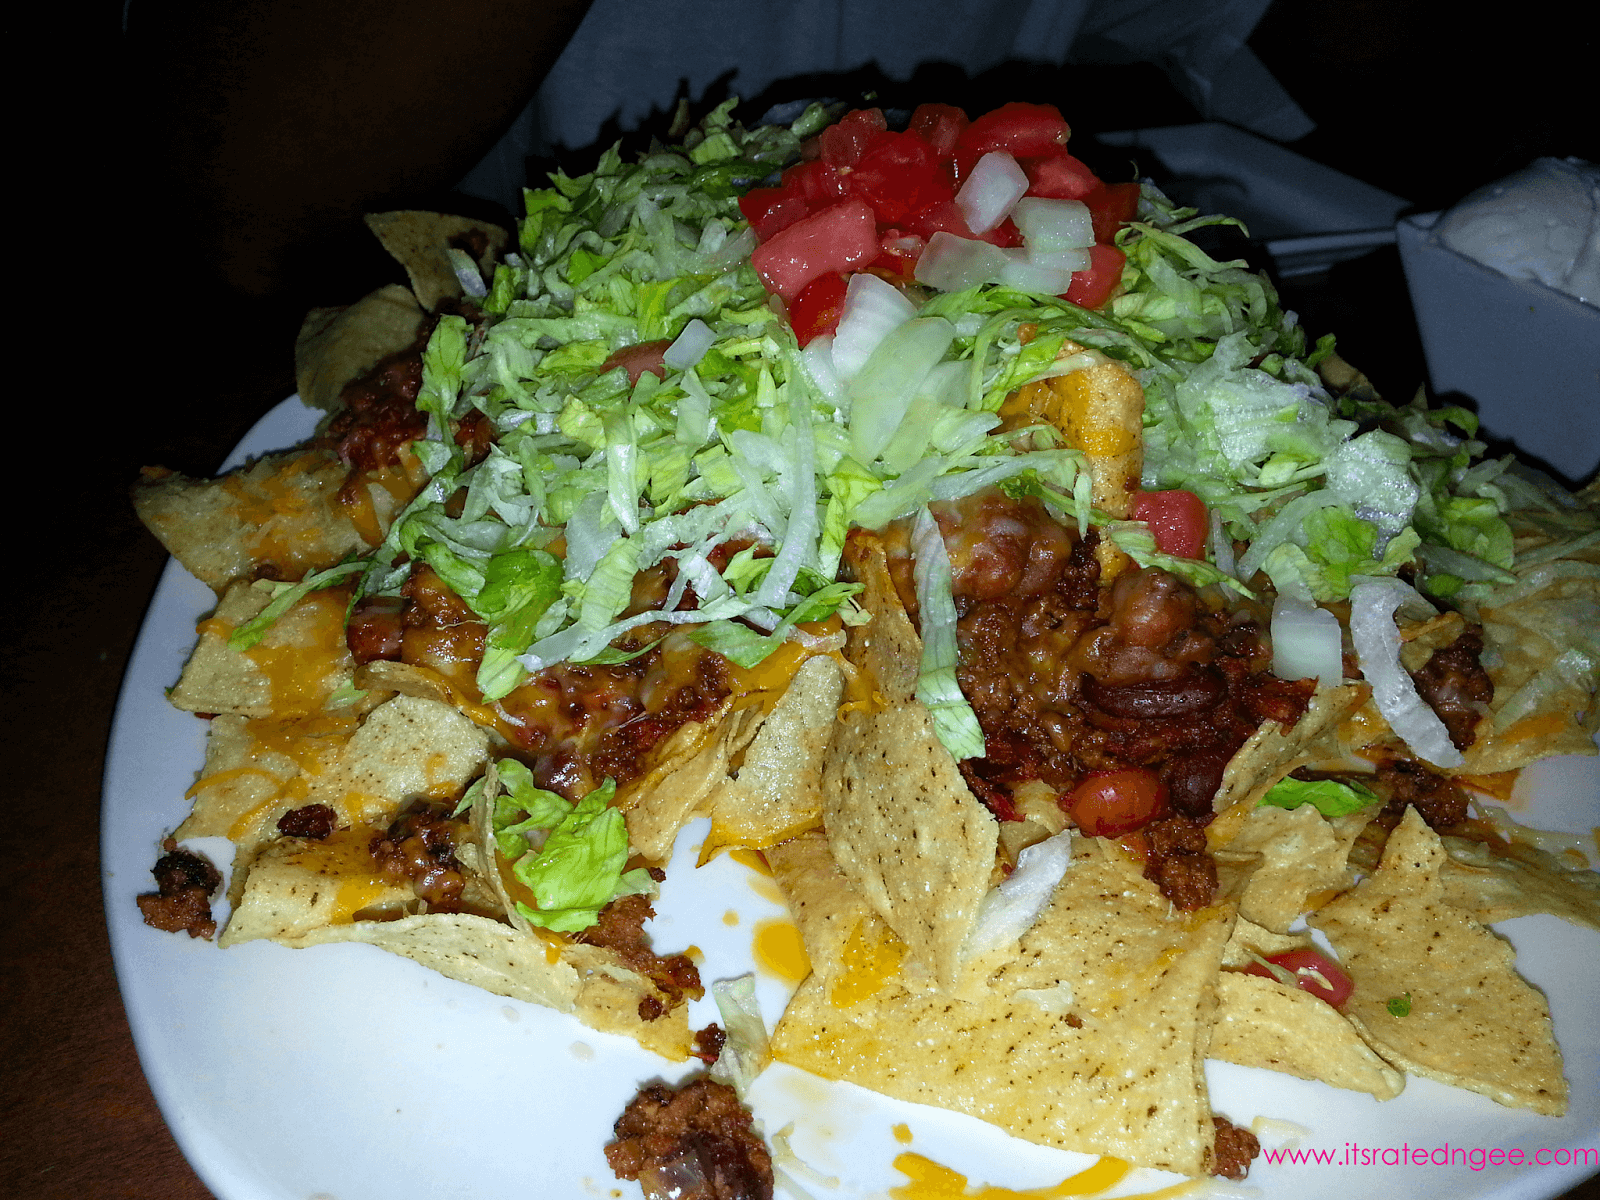 Appetizer: Nachos All The Way